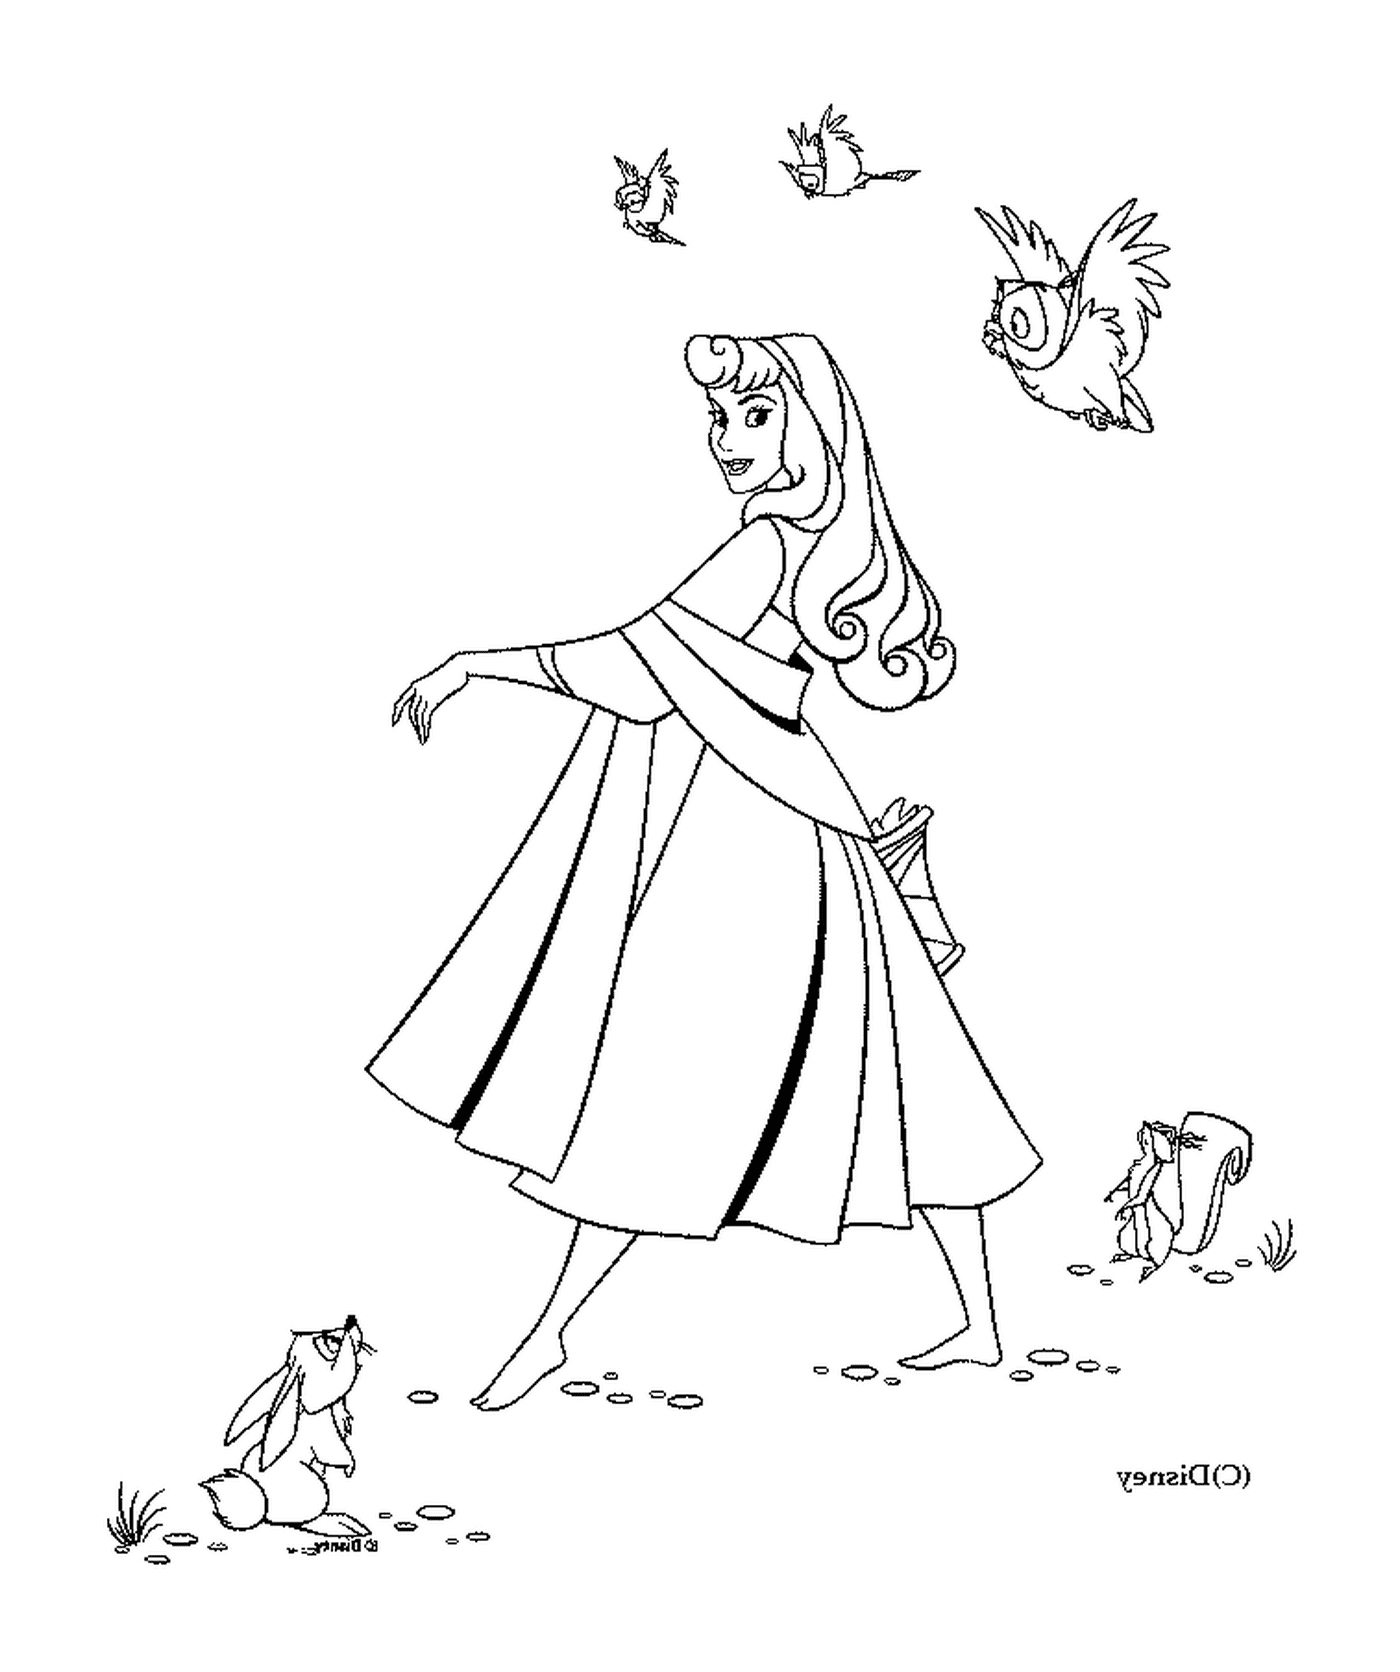  Woman with birds, rabbit and squirrel 